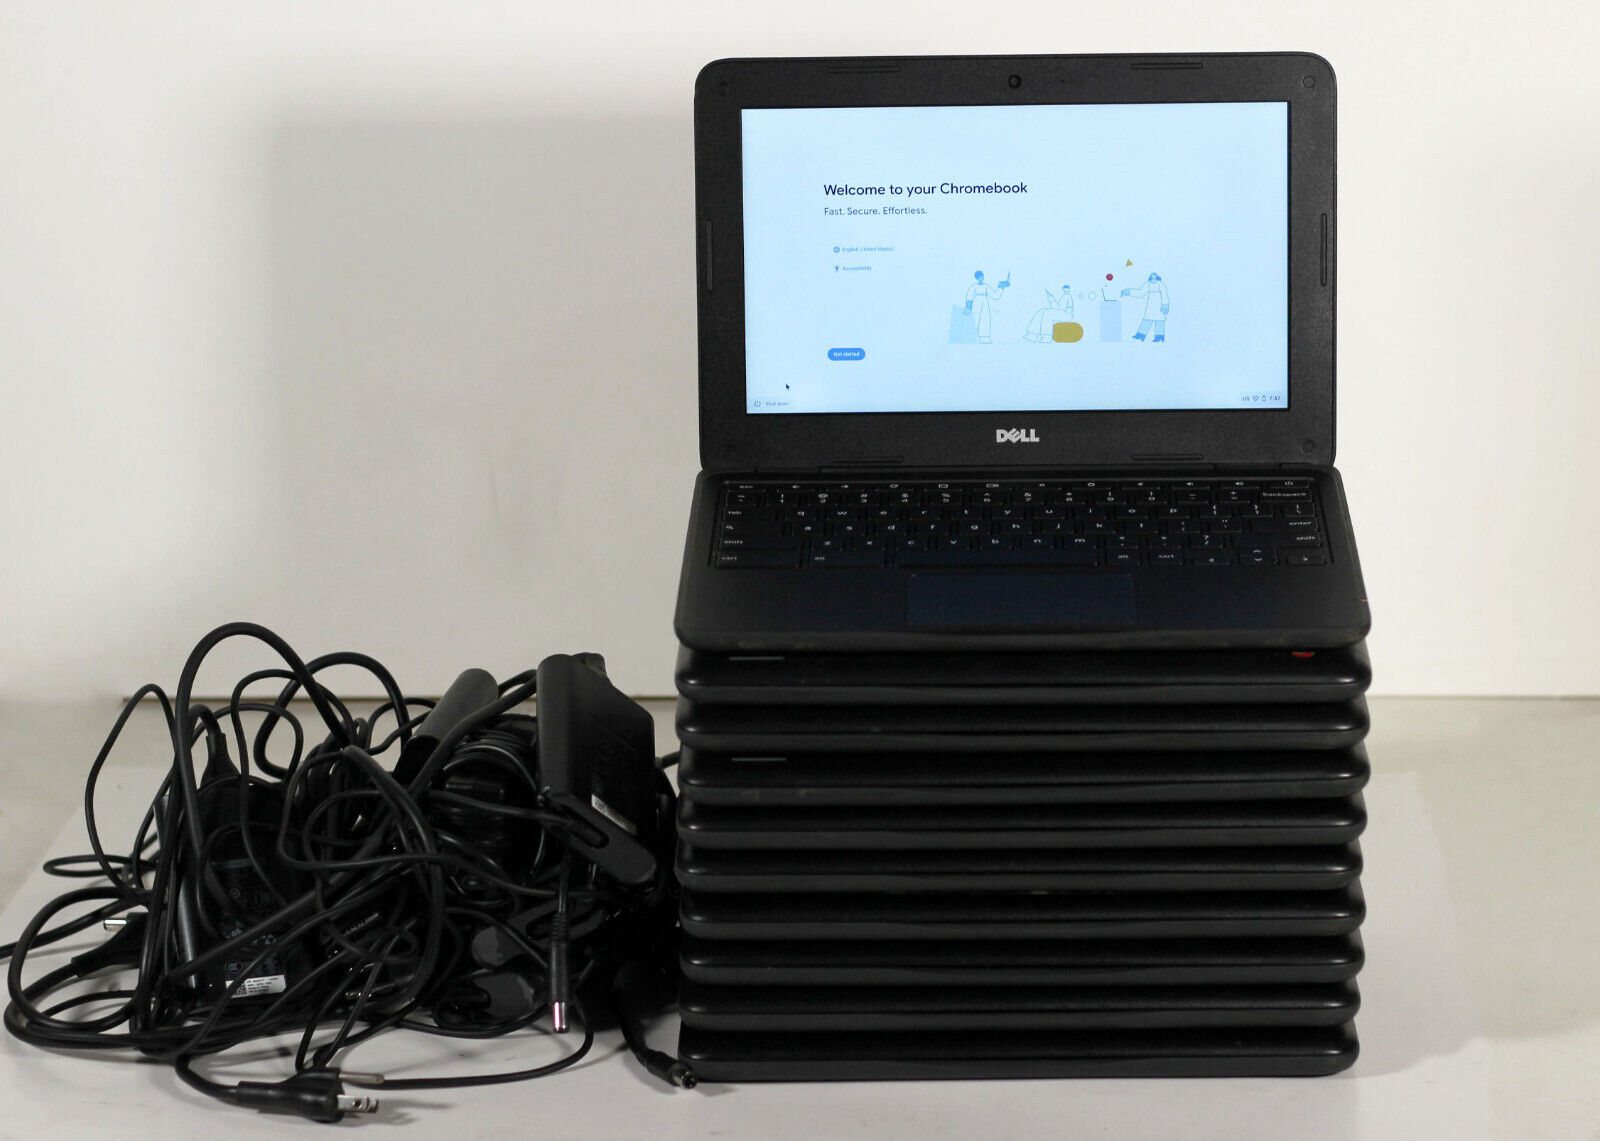 Lot of 10 - Dell Chromebook 11 3180 11.6" Celeron N3060 4GB RAM 16GB SSD Charger Dell 3VK89